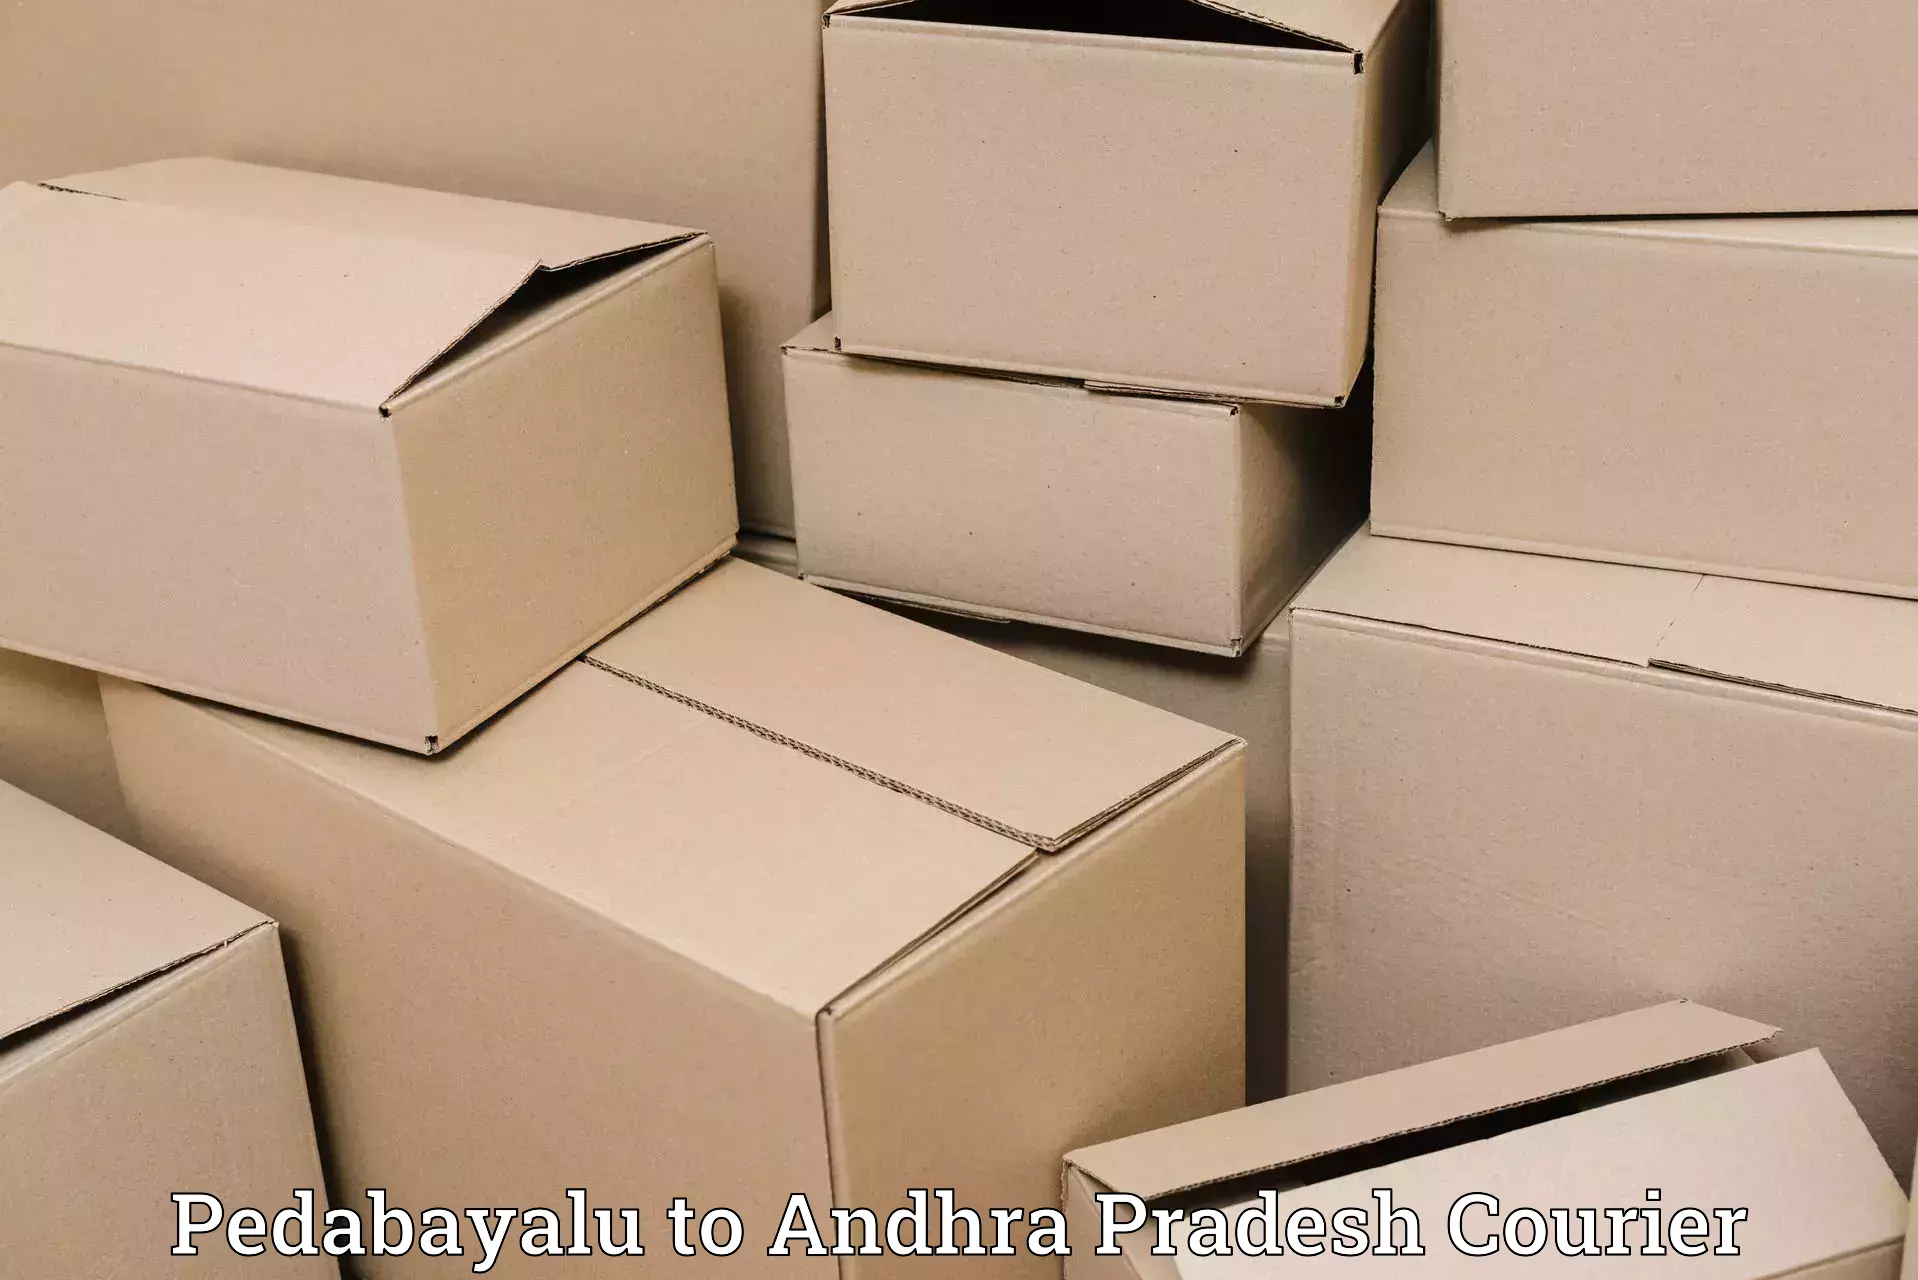 Flexible delivery scheduling Pedabayalu to Andhra Pradesh